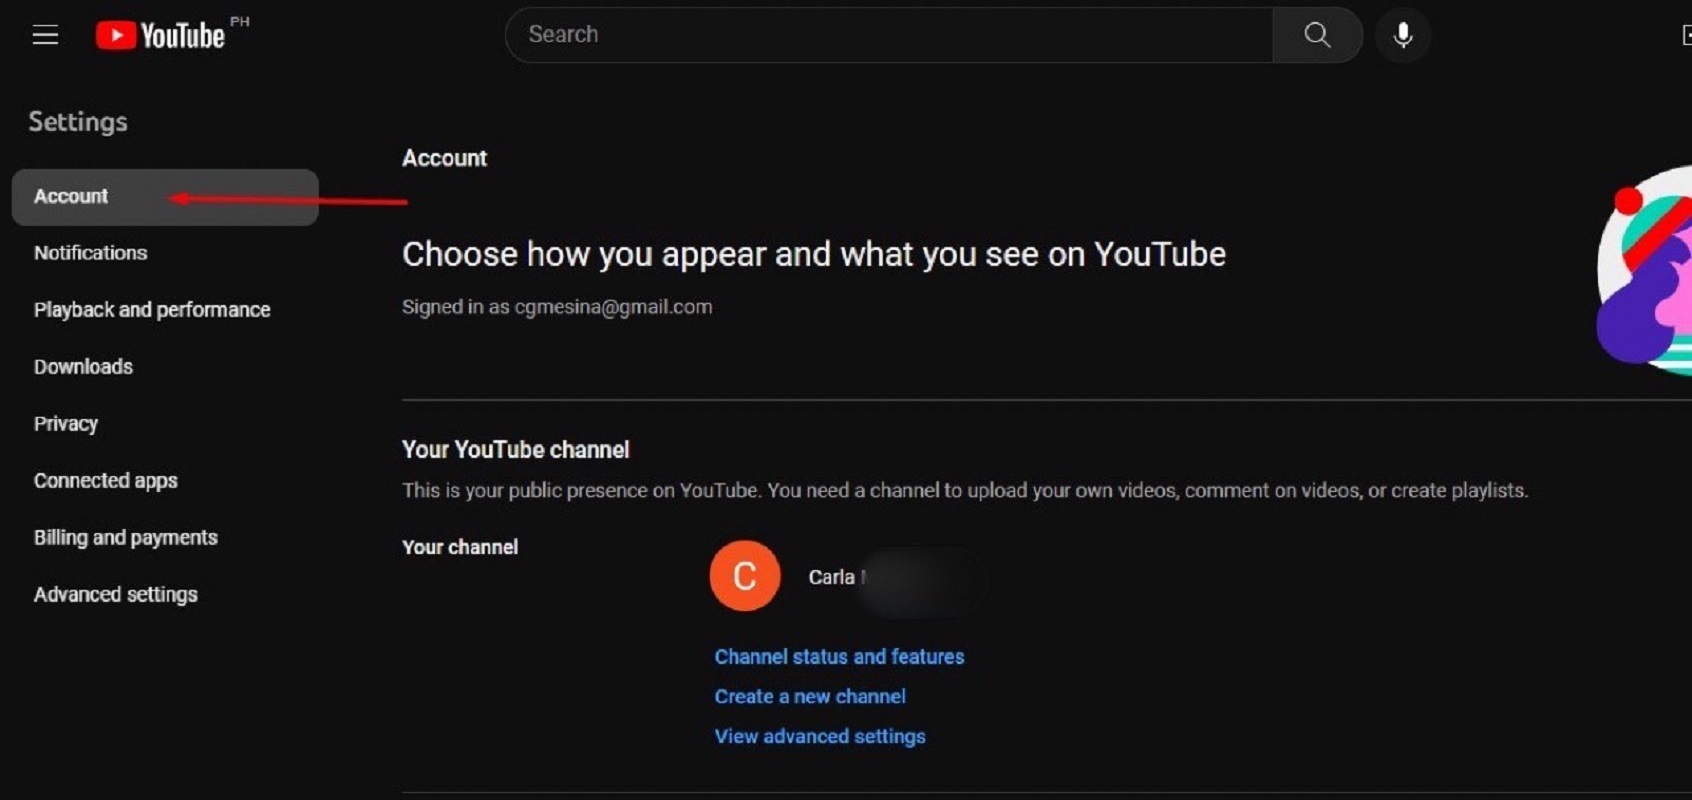 Youtube website showing account button